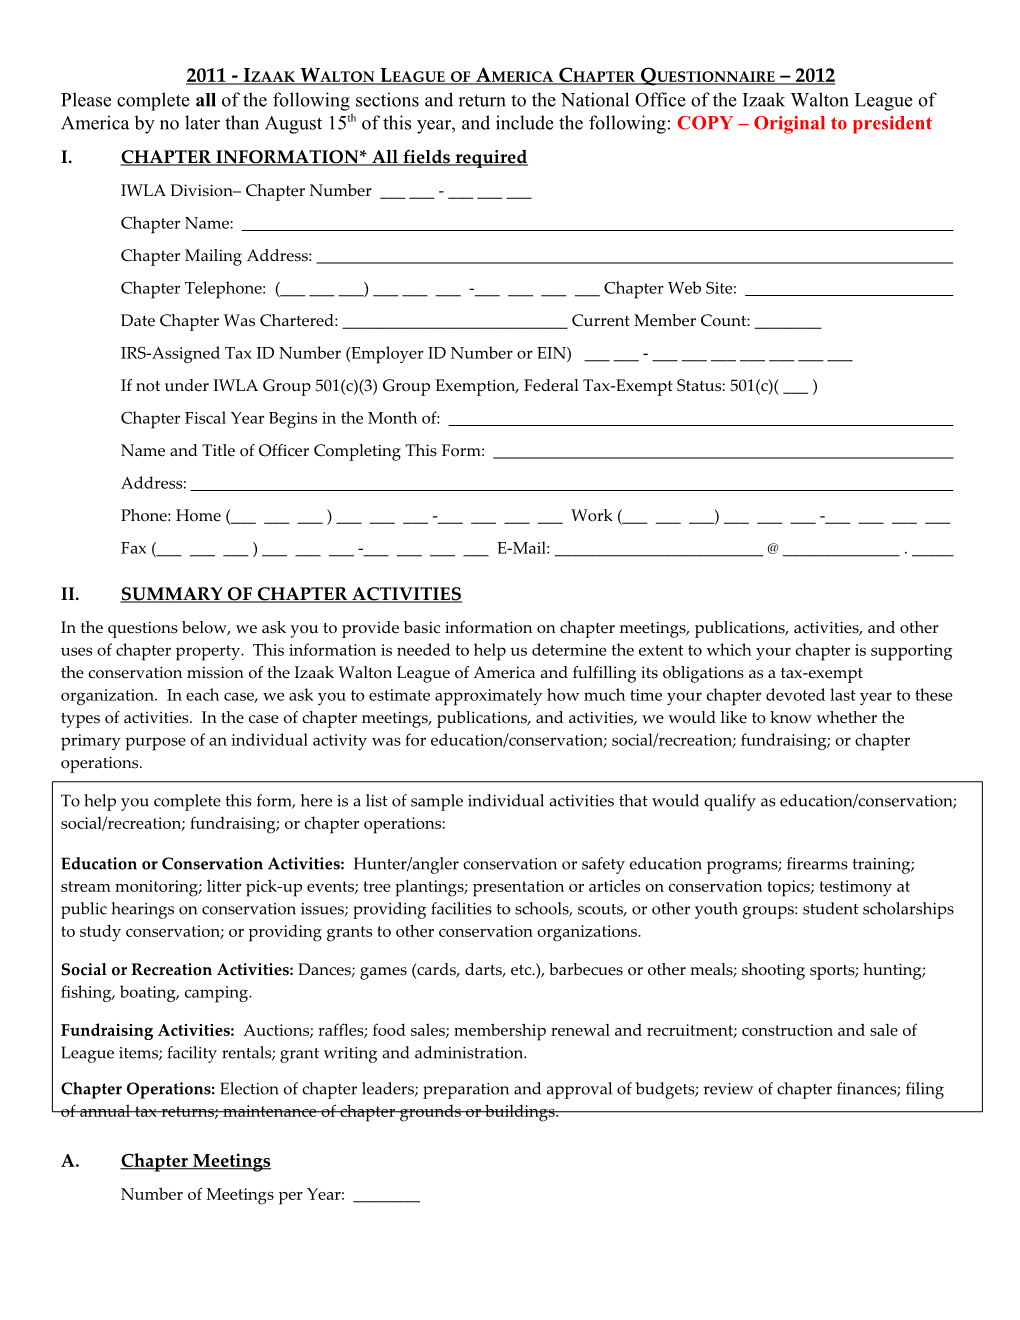 Questionnaire for Application for Group Tax Exempt Status